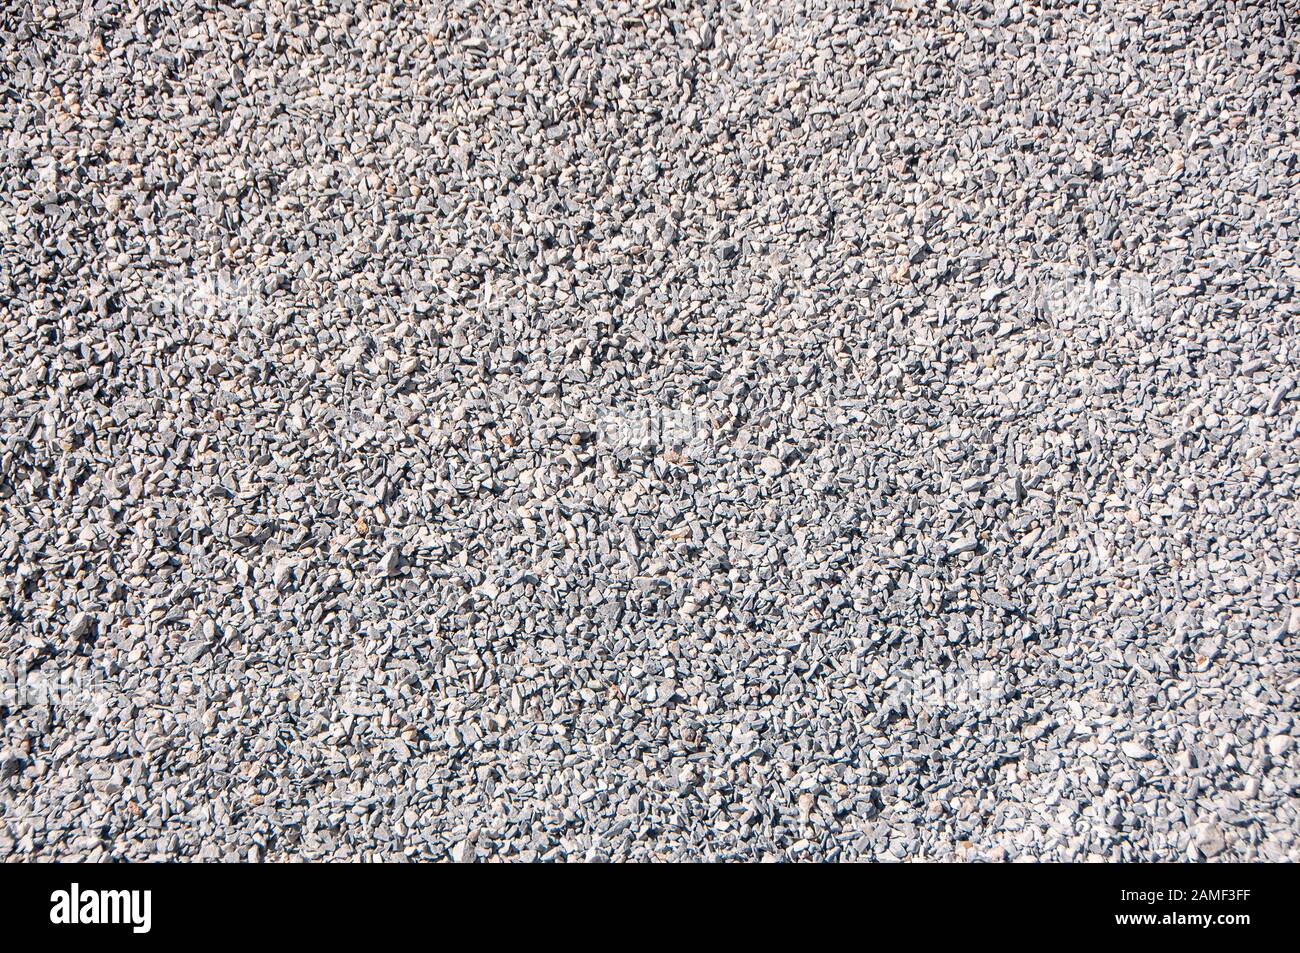 Fine gravel stone texture background for construction cement mixing. Stock Photo